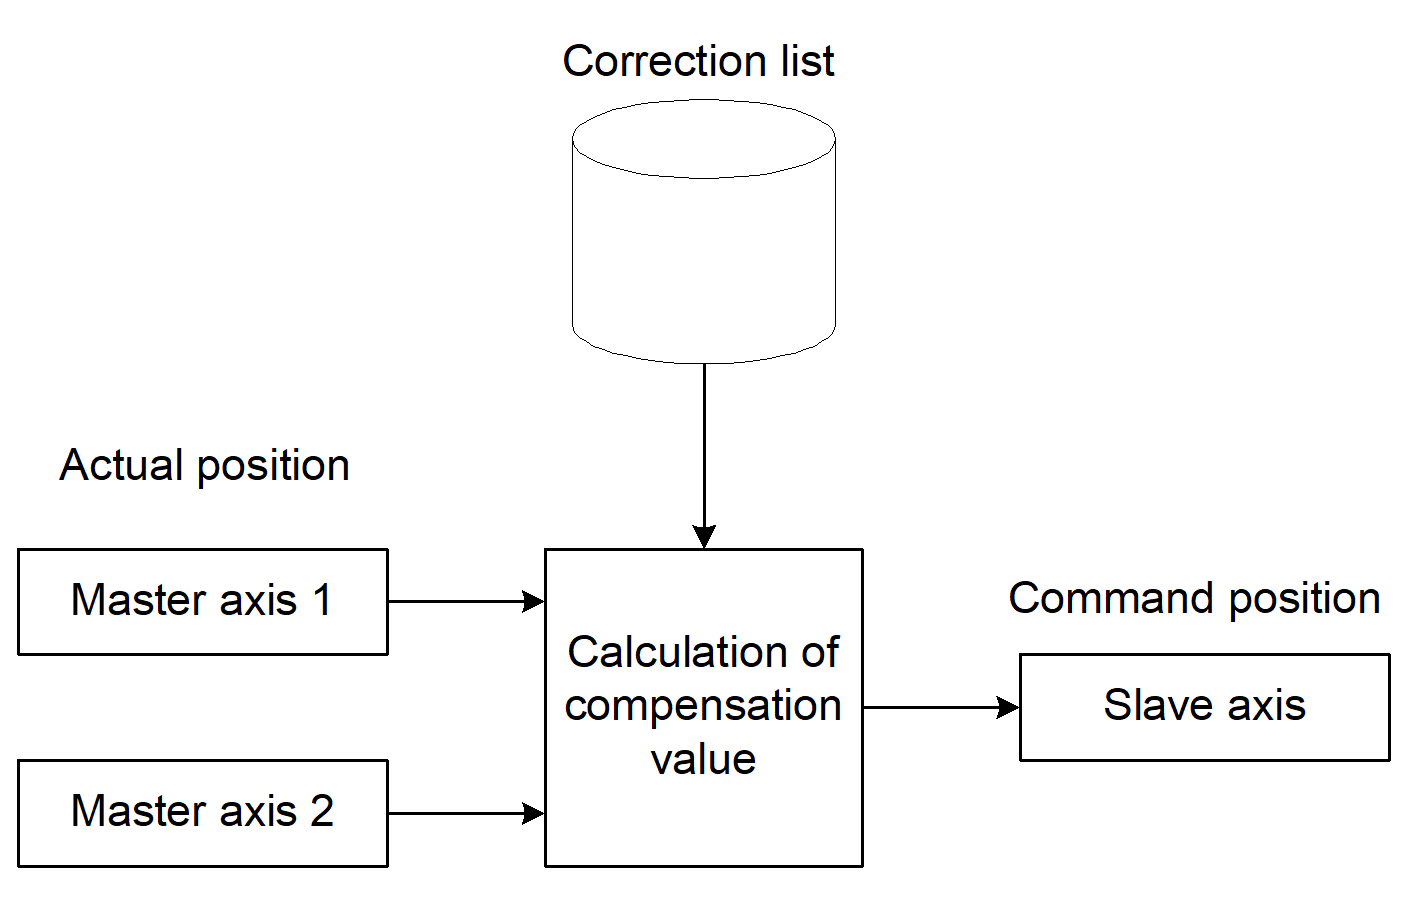 Schematic of the compensation value calculation for plane compensation